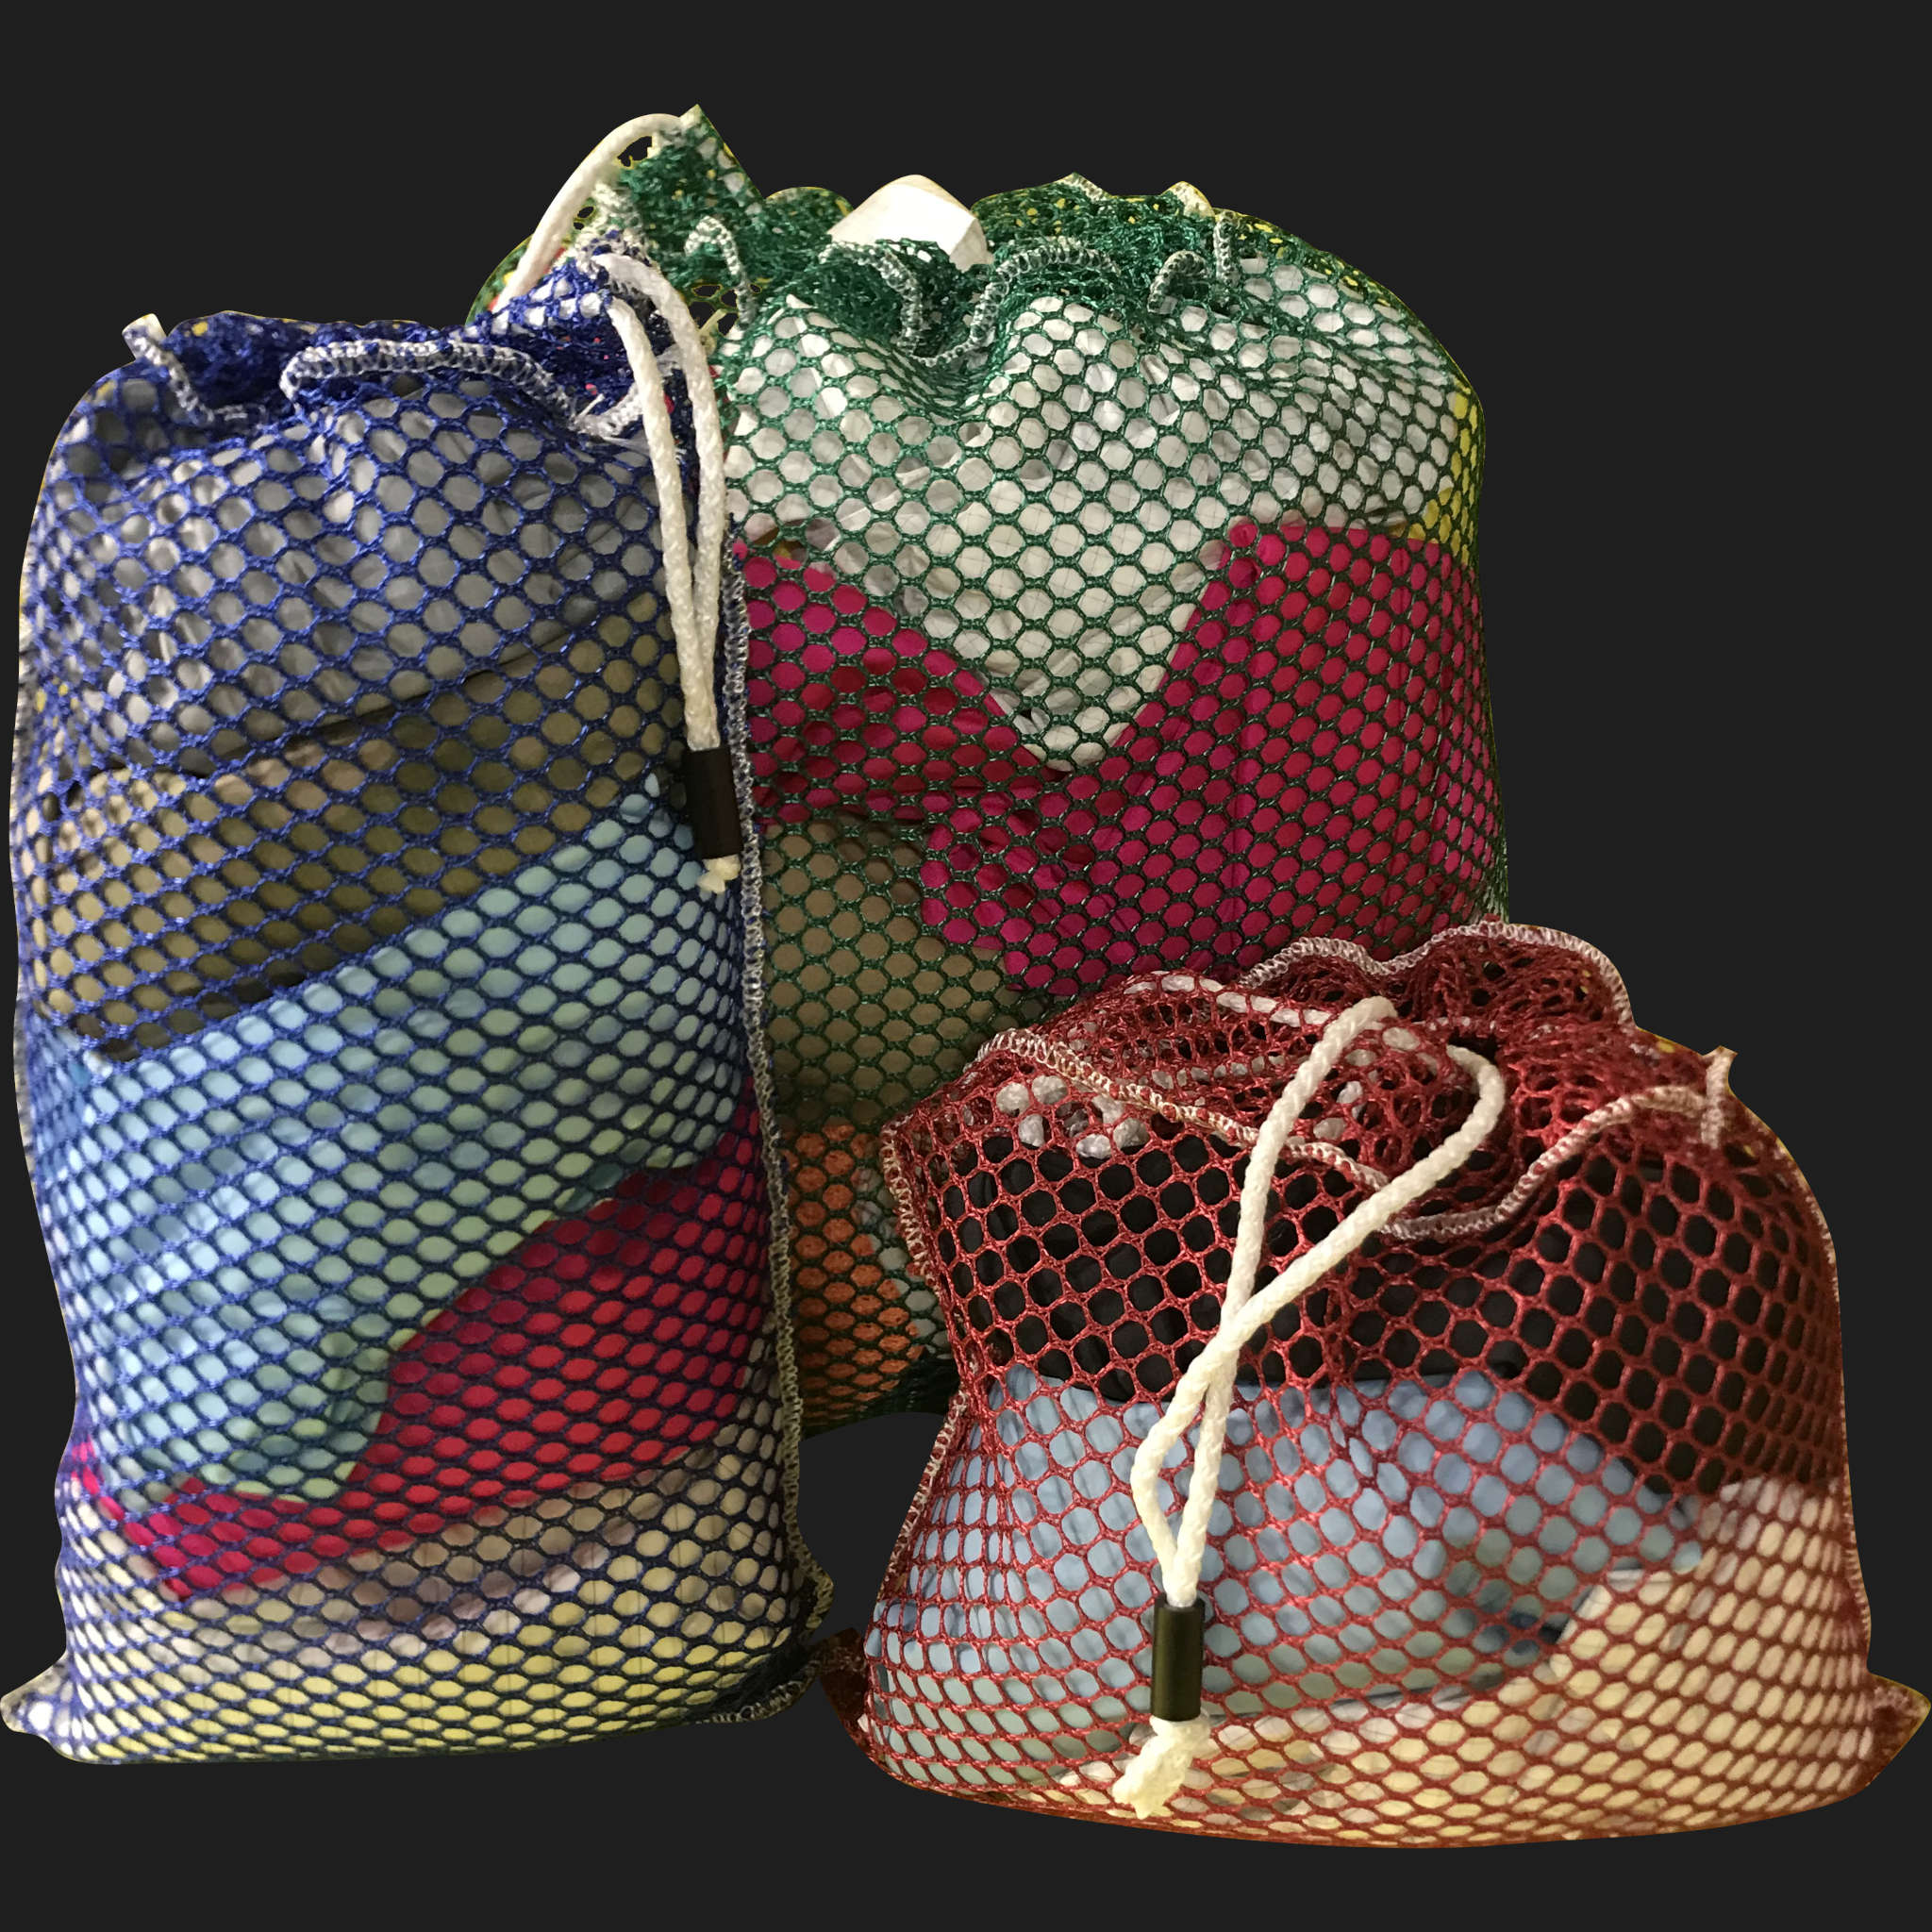 50" x 78" Customized Mesh-Net-Laundry Bags Heavy Duty with Cord and barrellock closure